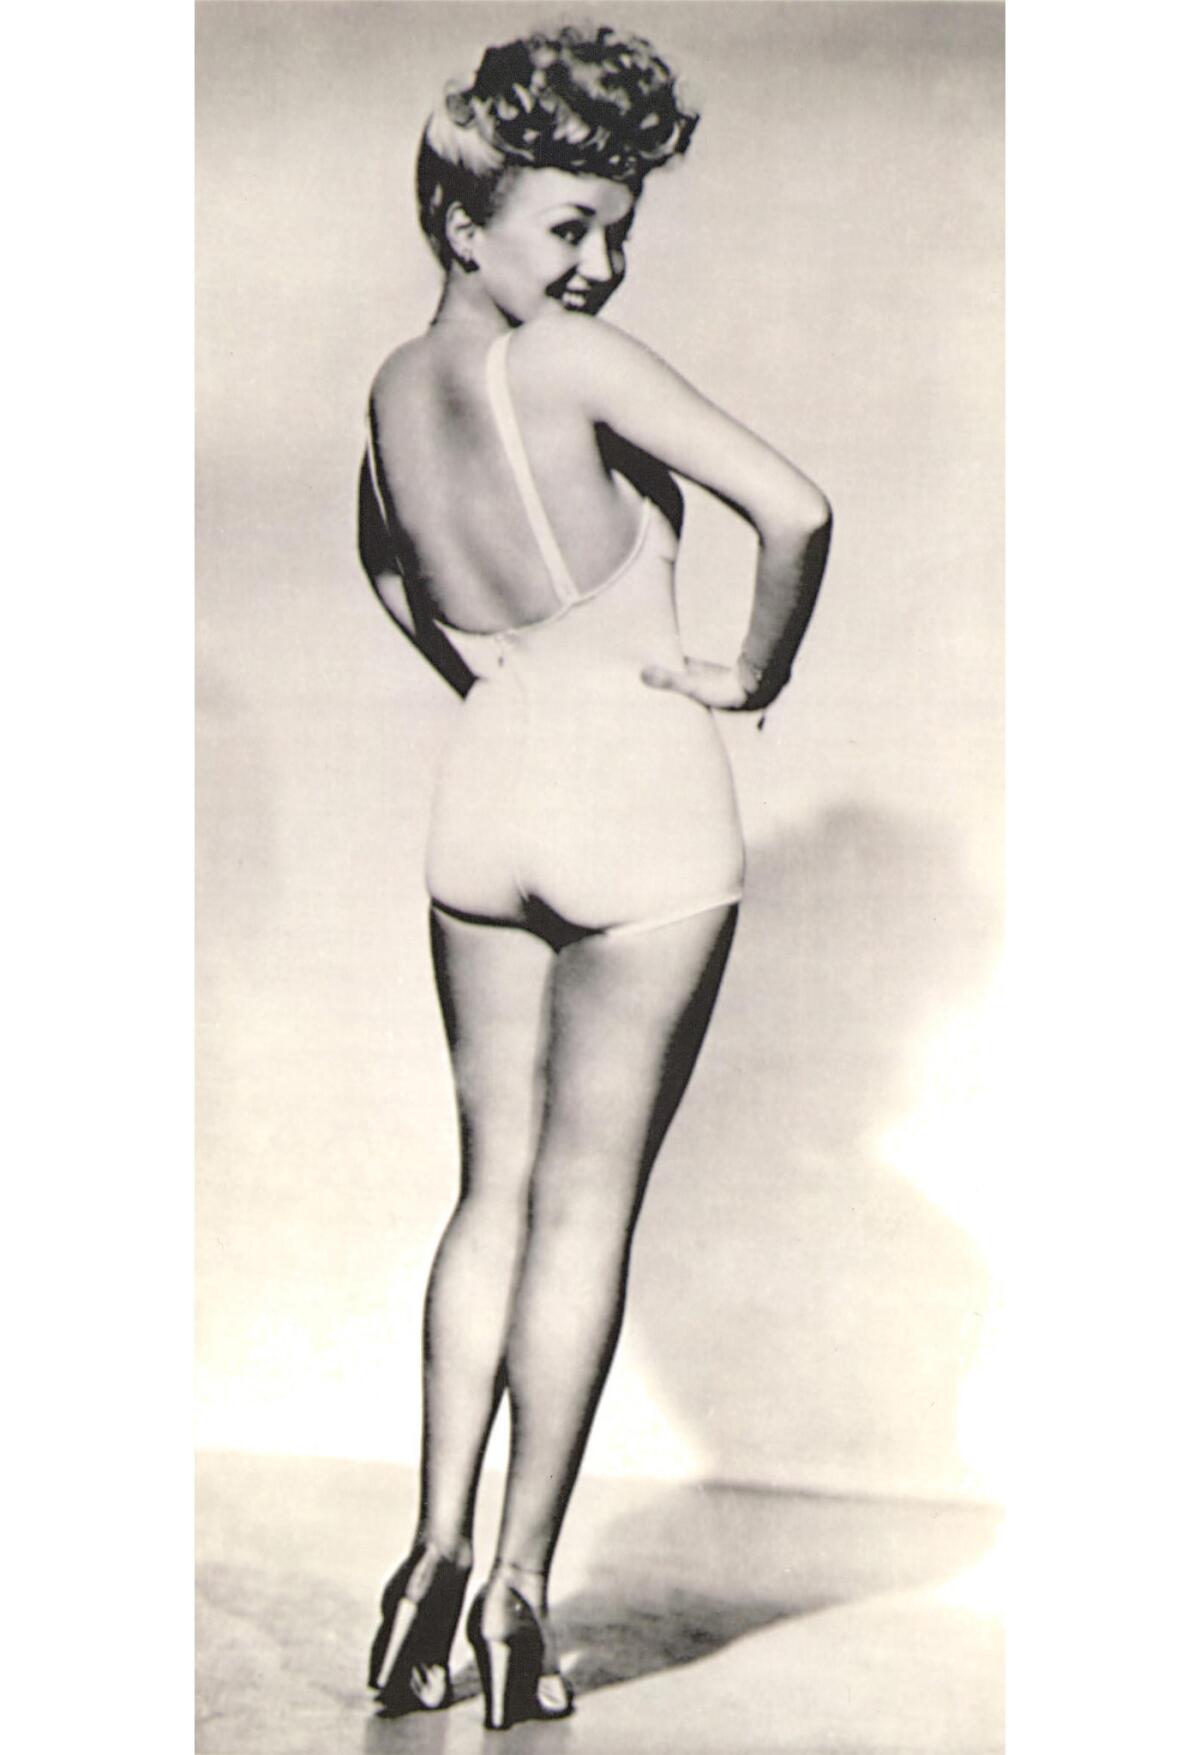 Actress, singer and dancer Betty Grable poses for a pinup photo that made her a favorite with U.S. troops during World War II. Her legs were insured for $1 million as a publicity stunt.